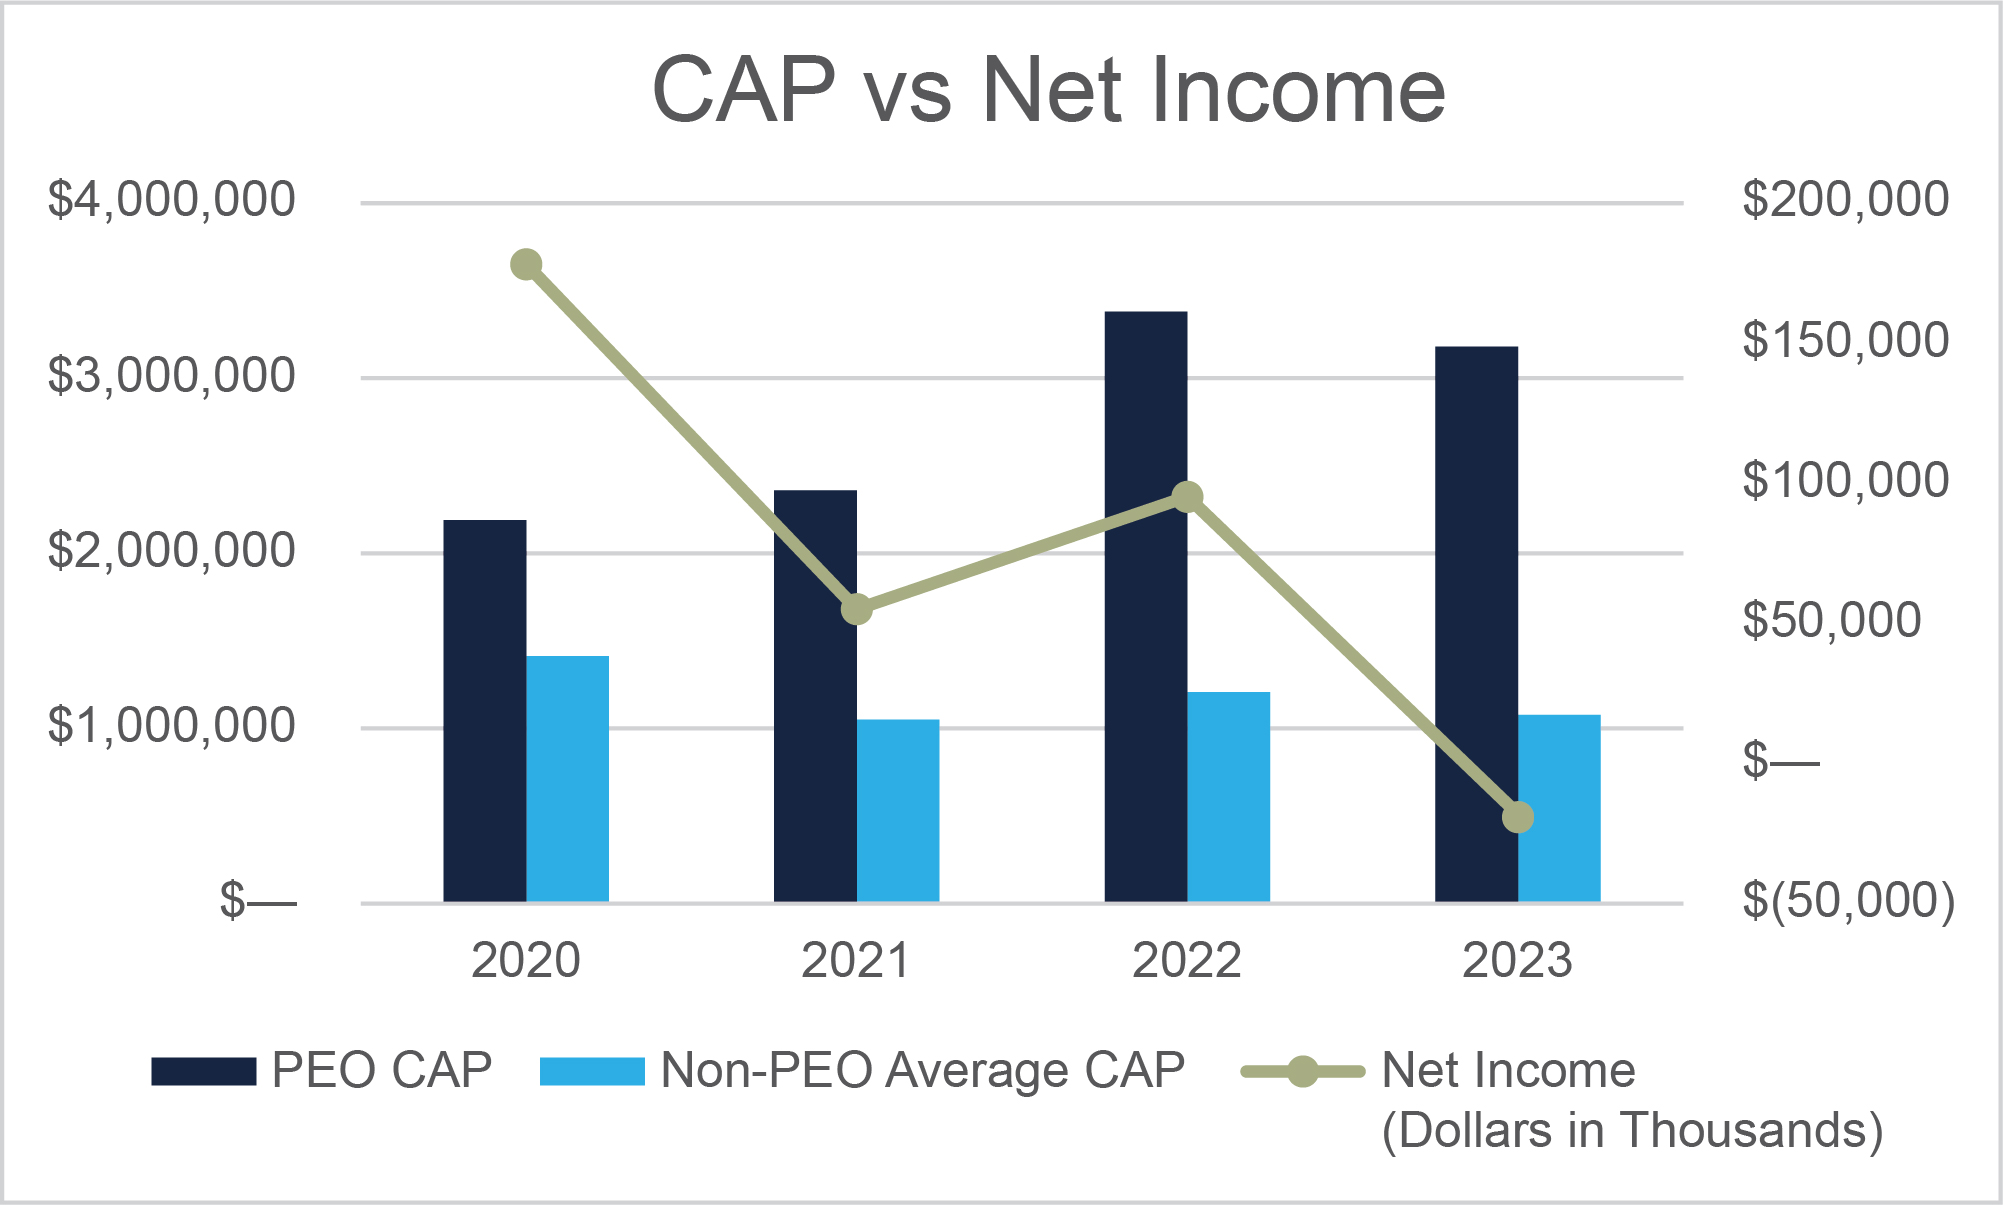 Mixed bar/line graph in millions showing PEO CAP and non-PEO average CAP vs. net income for 2021-2023